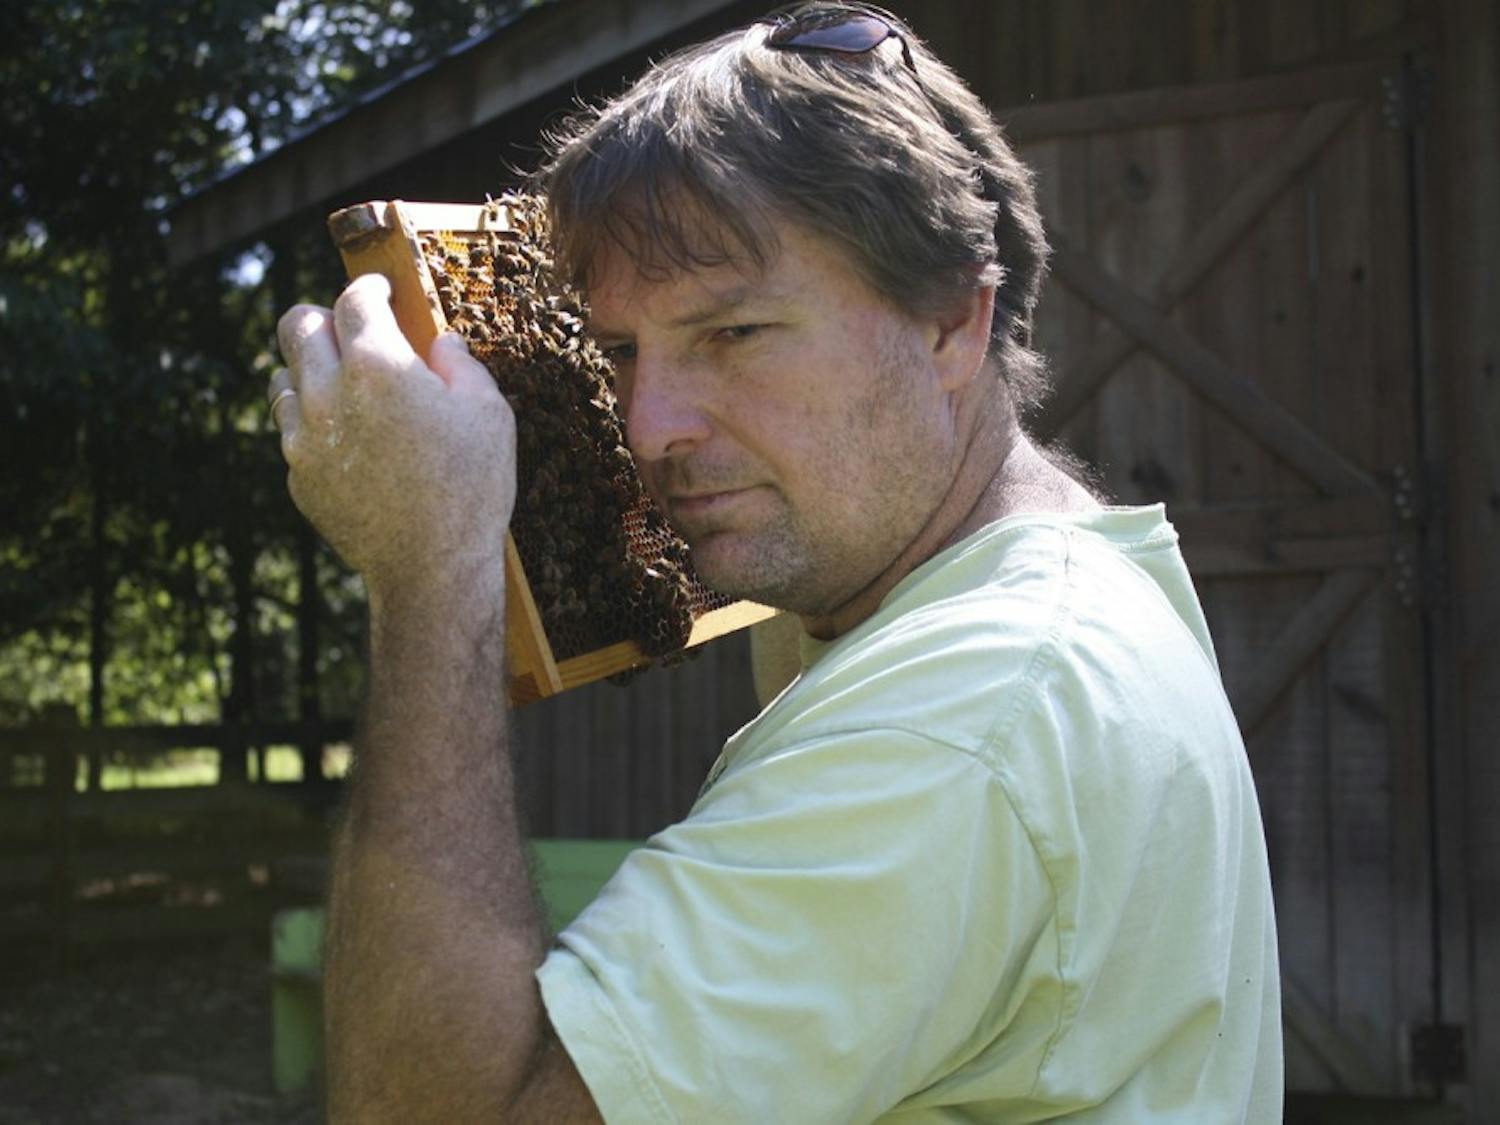 Marty Hanks, the creator of "Just Bee Apiary," a bee farm located on his land just outside of downtown Chapel Hill, checks on his honeybees. Hanks makes it a priority to raise his thousands of bees without the use of unnatural chemicals.